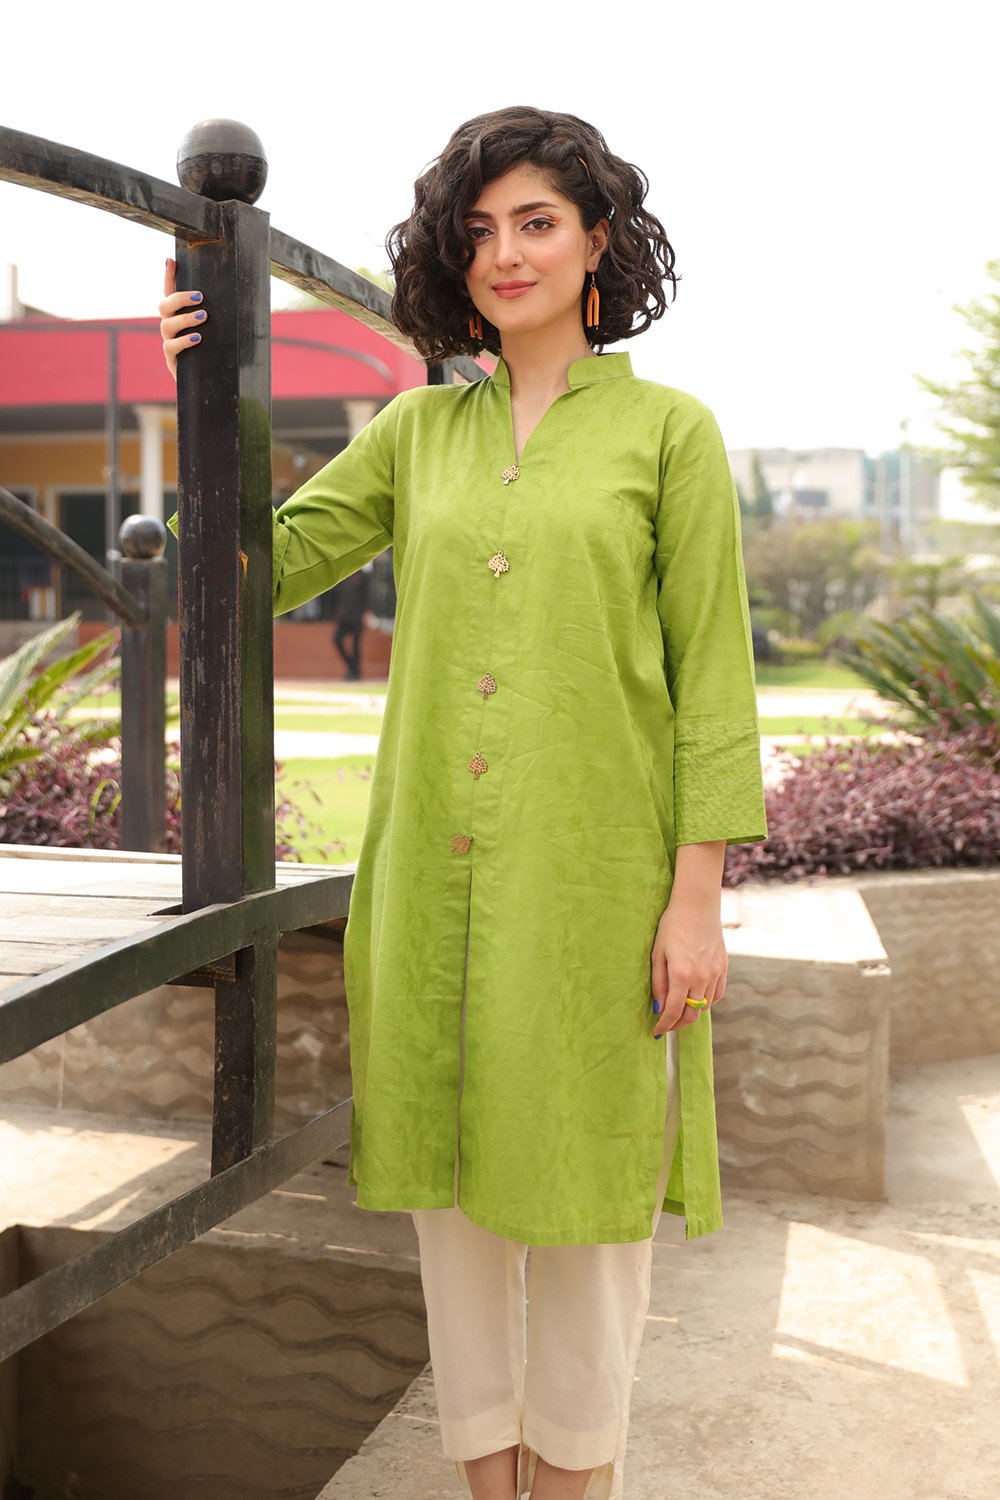 Buy Adam N Eve Women Blended Hand Made Embroidery Lemon Green Kurti 10XL at  Amazon.in